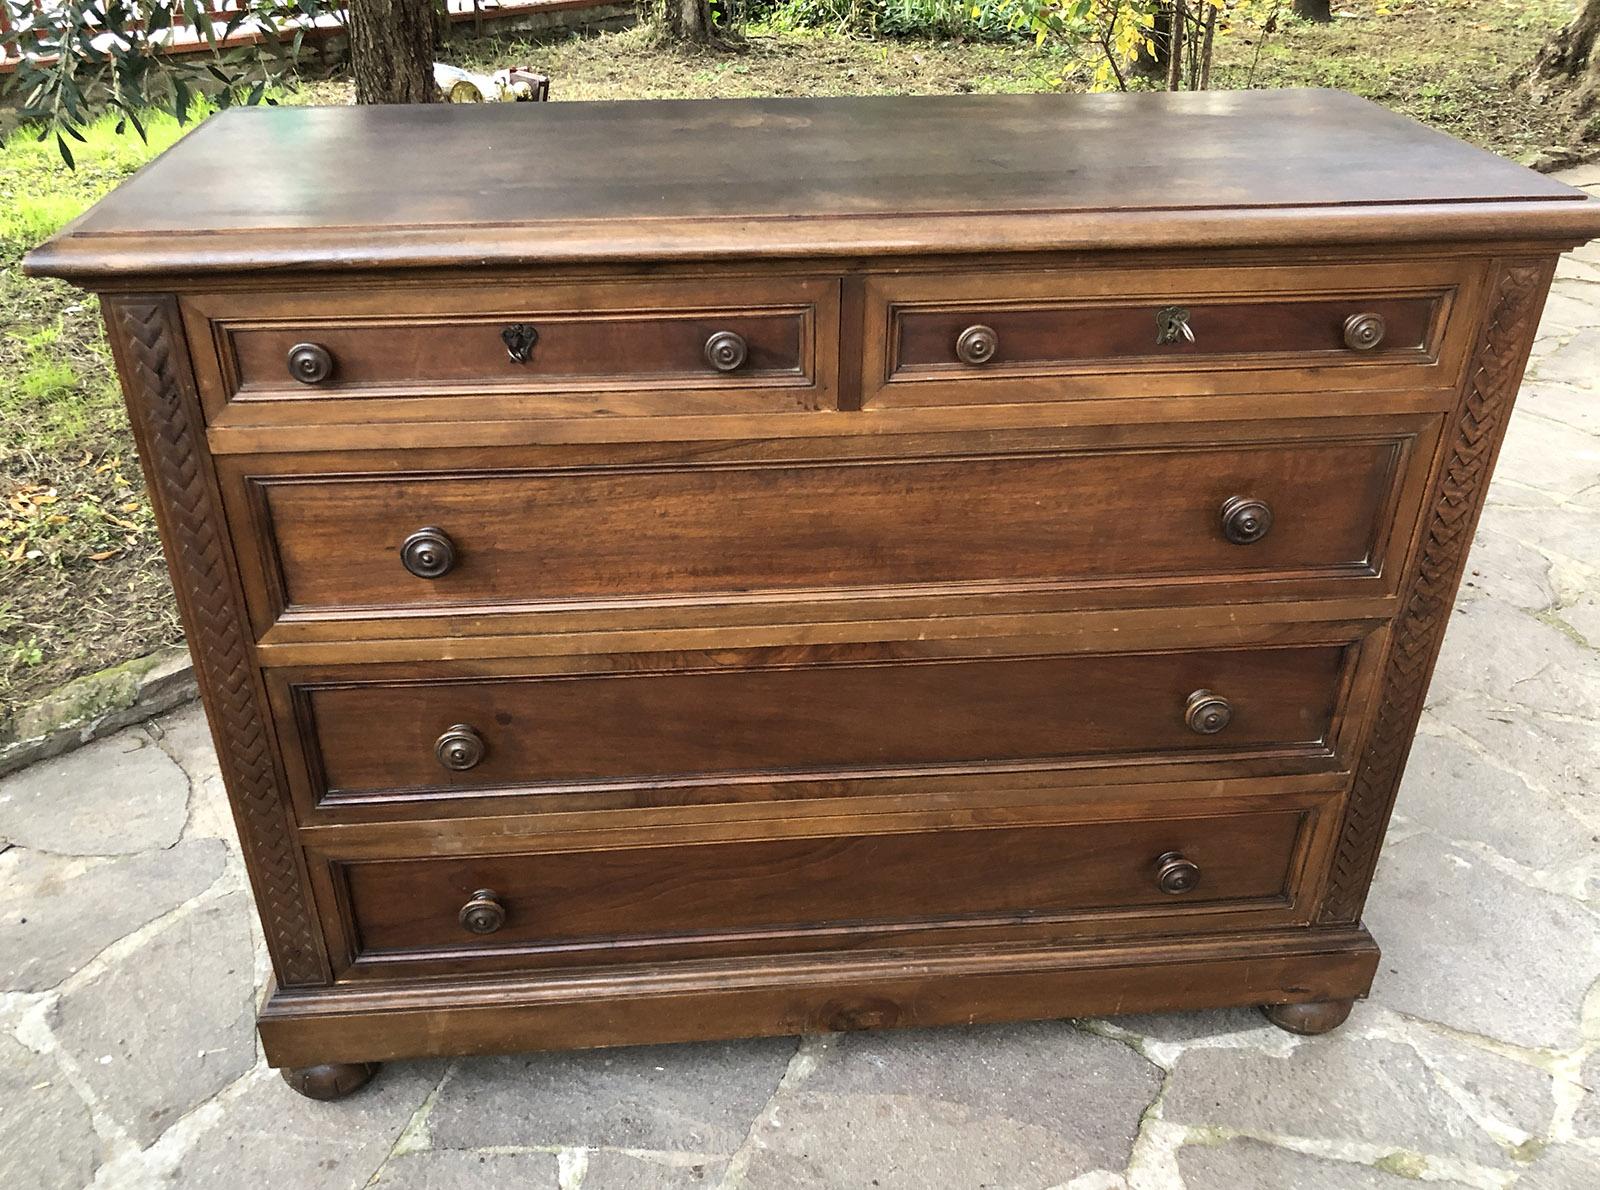 Dresser drawer, in walnut, with five drawers, locks and original keys, original made in Italy, from Tuscany, near Lucca.
Good size and design.
Beautiful proportions, very robust, excellent construction.
Wax finish, original patina.
Original